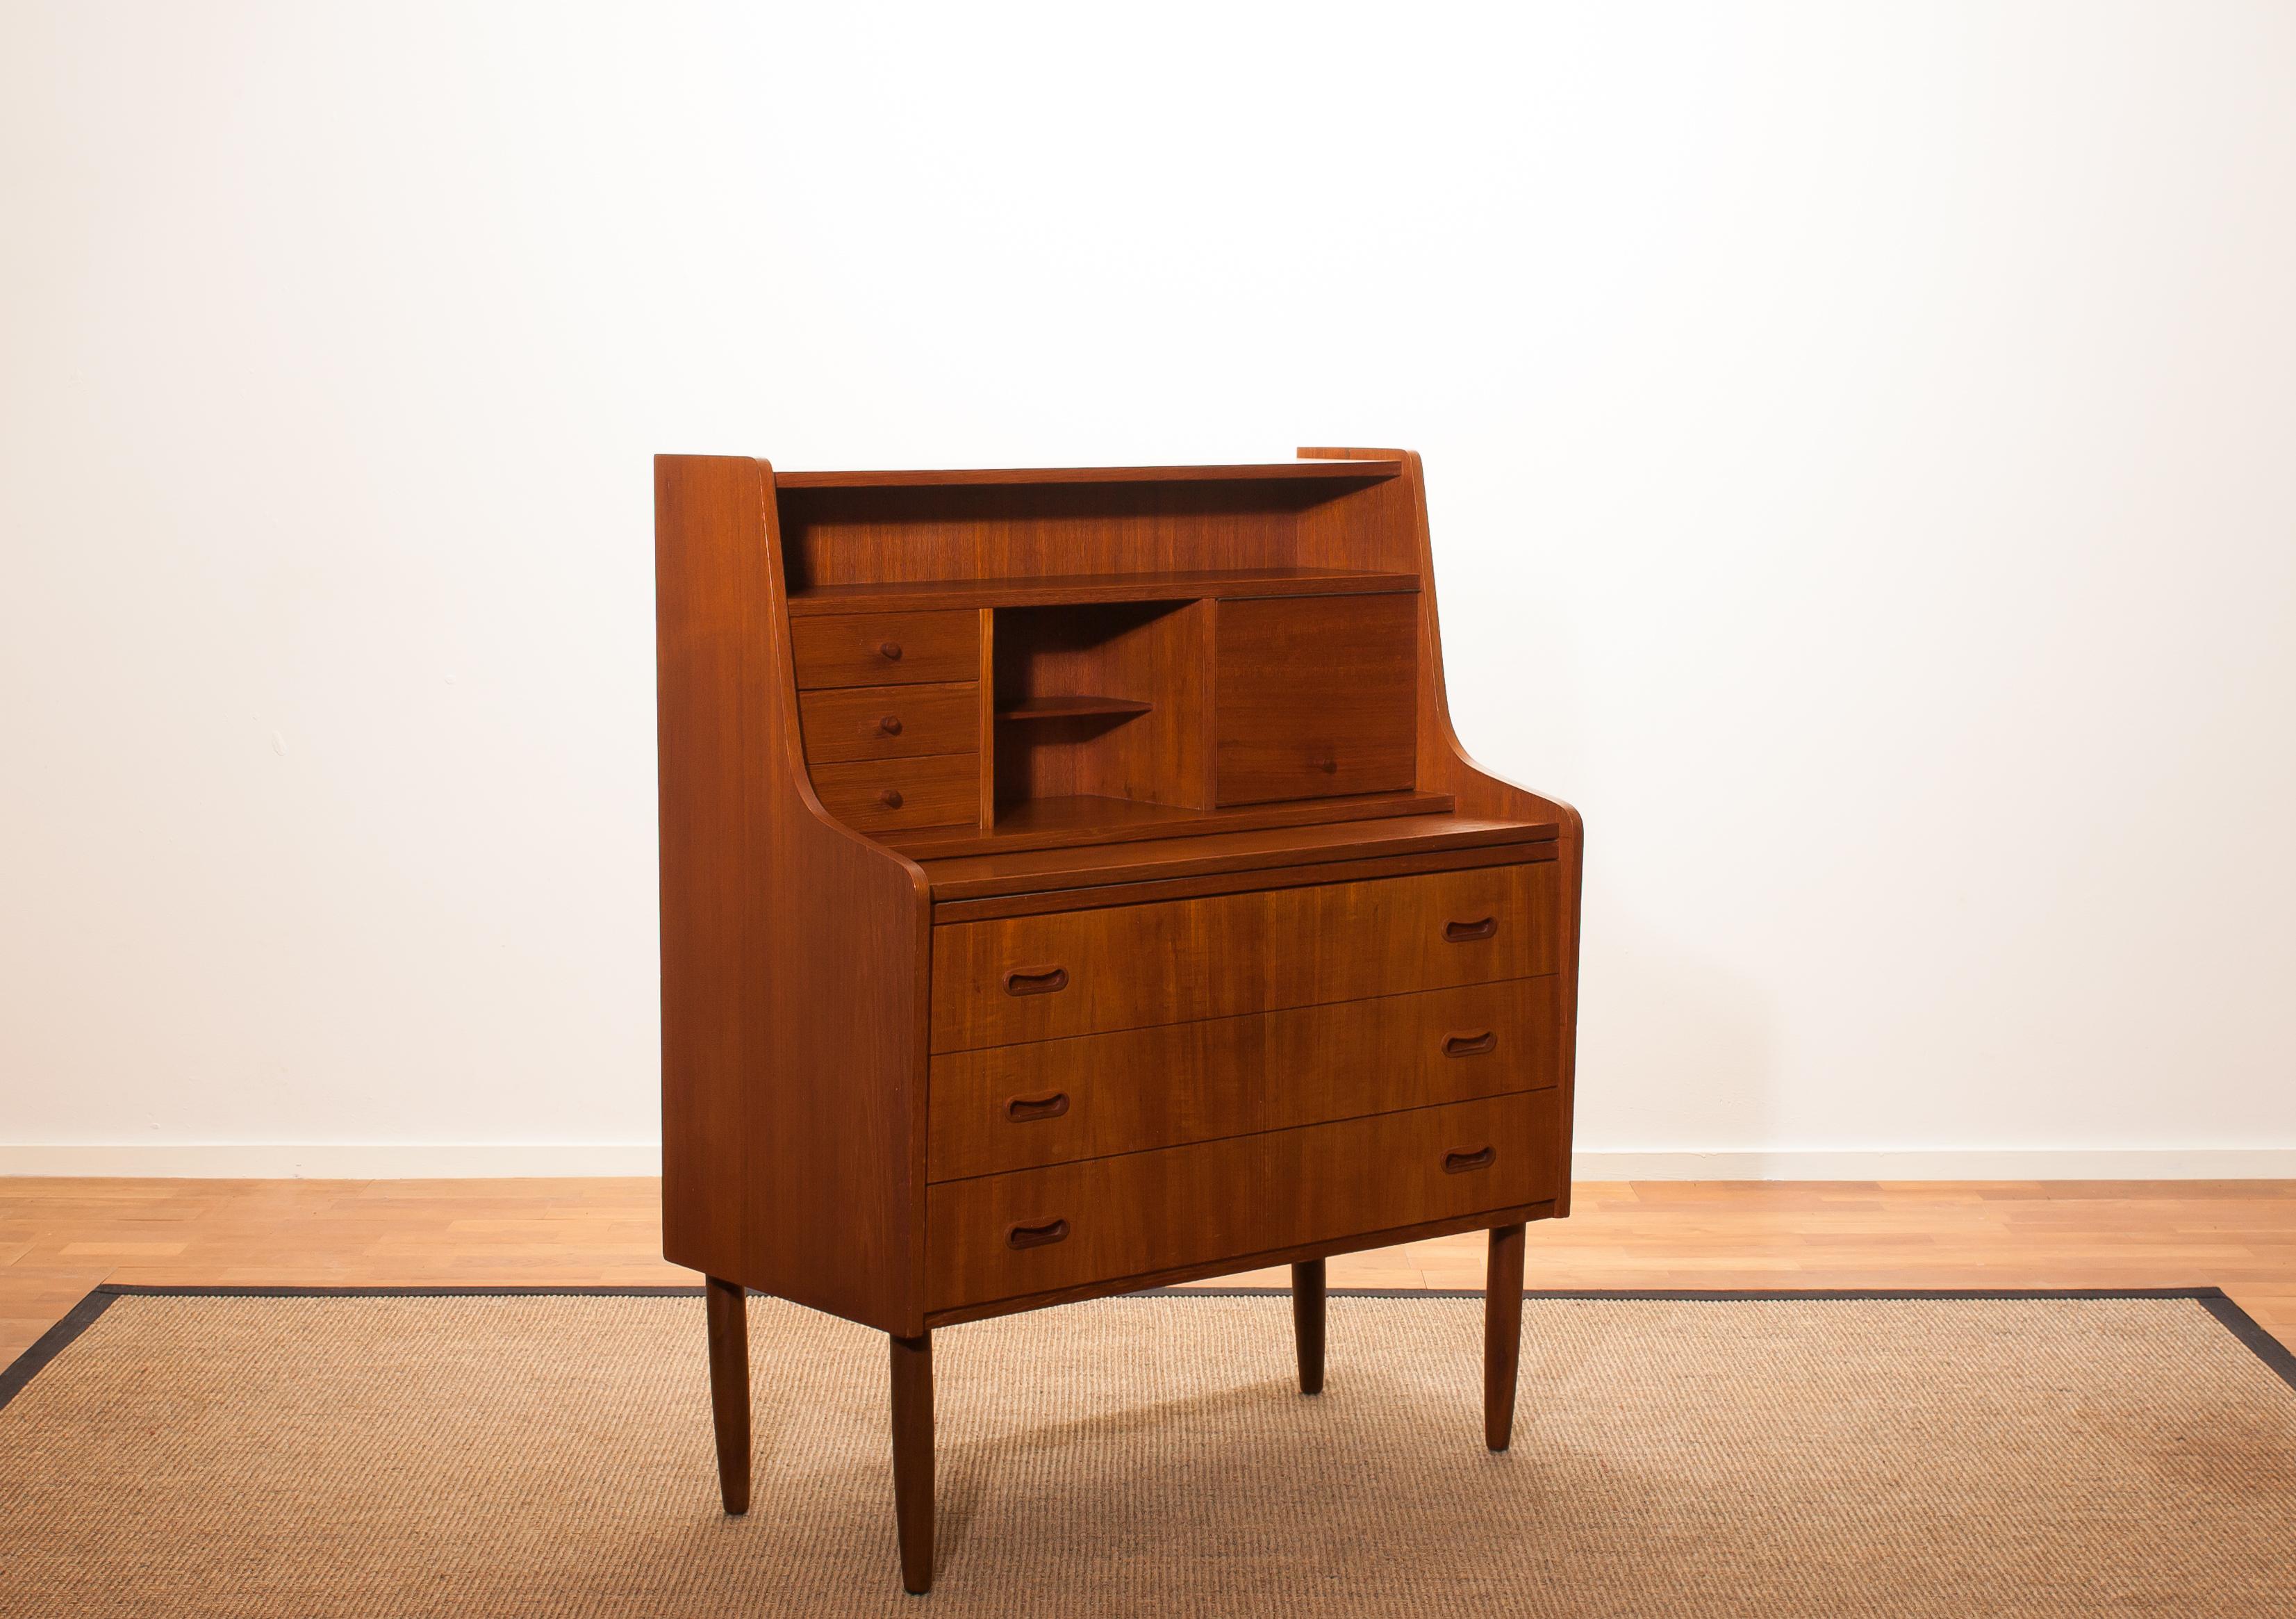 Beautiful secretaire or dressing table in the style of Peter Hvind.
The secretaire is made of teak and has a lot of storage space, an extendable writing space and a mirror.
It is in wonderful condition.
Period 1950s.
Dimensions: H 110 cm (height